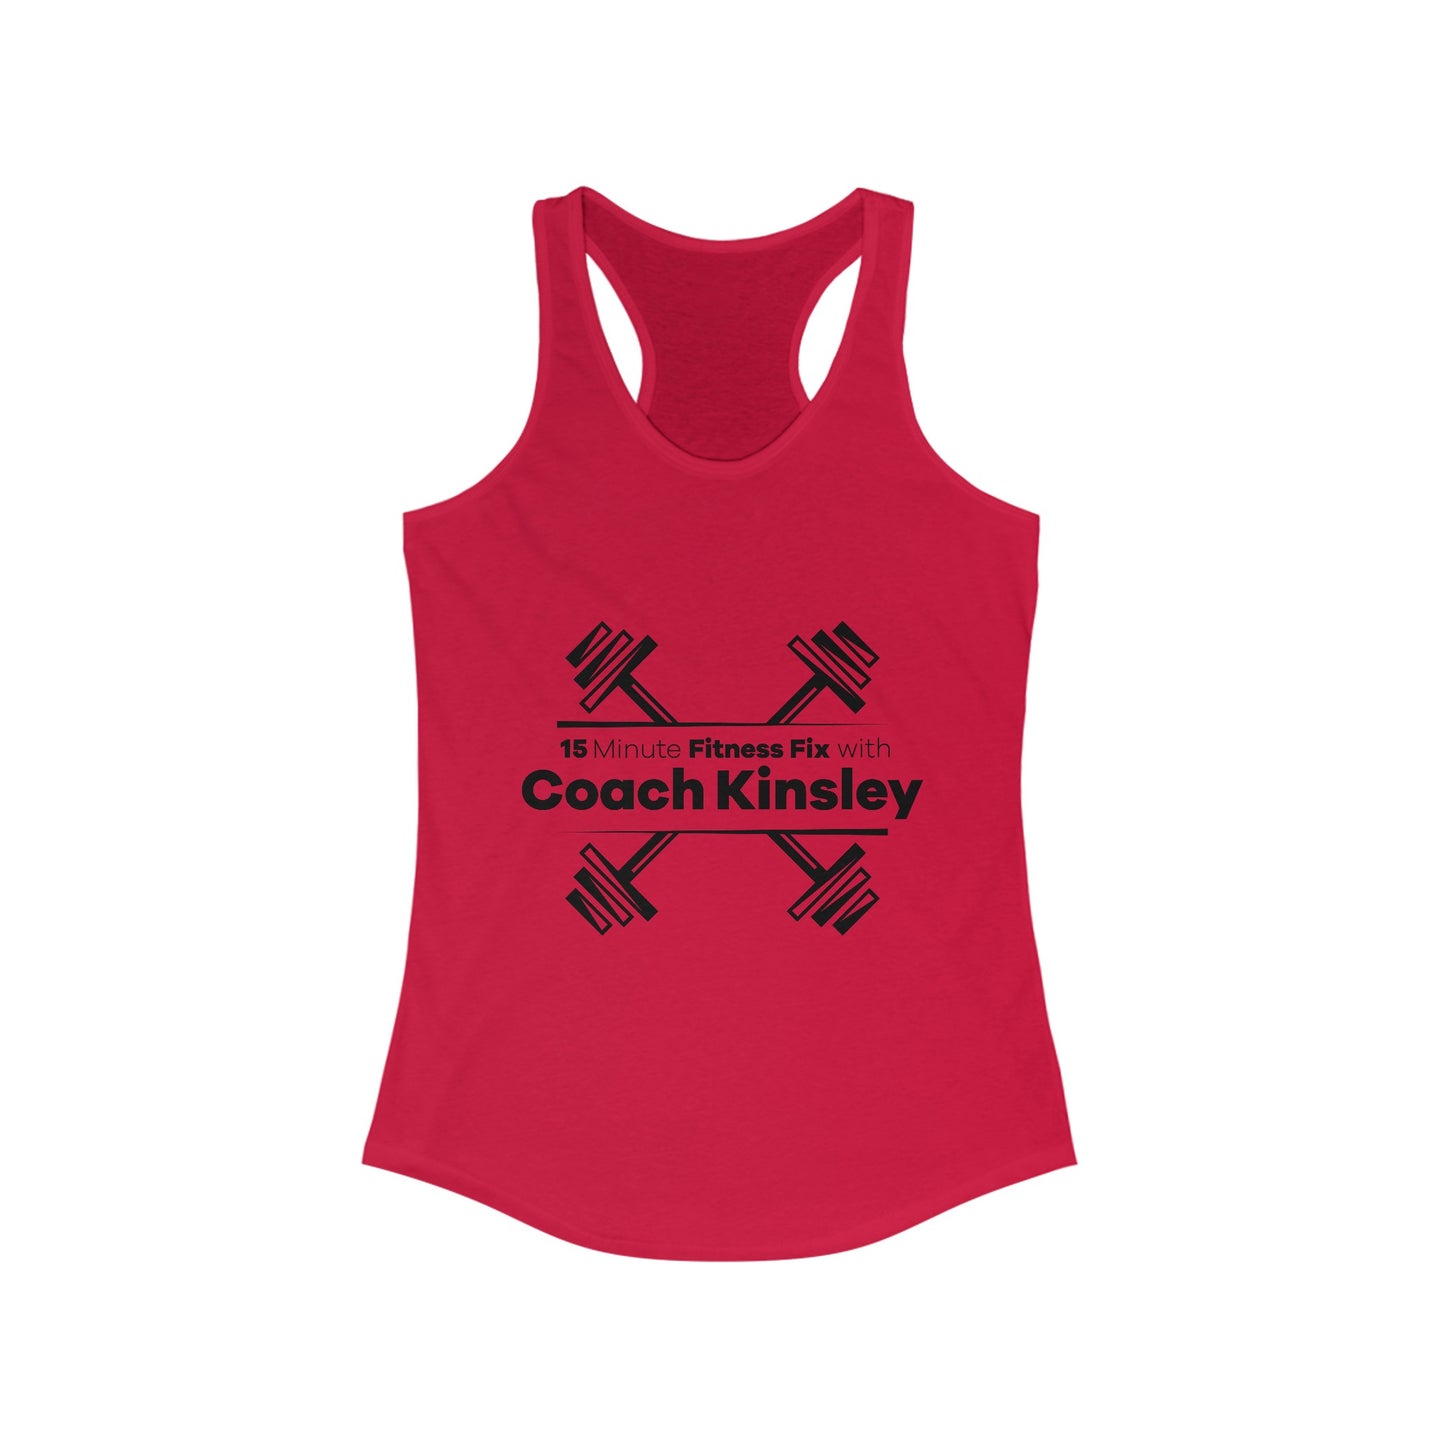 Racerback Tank (White, Coral, Gray, Red)